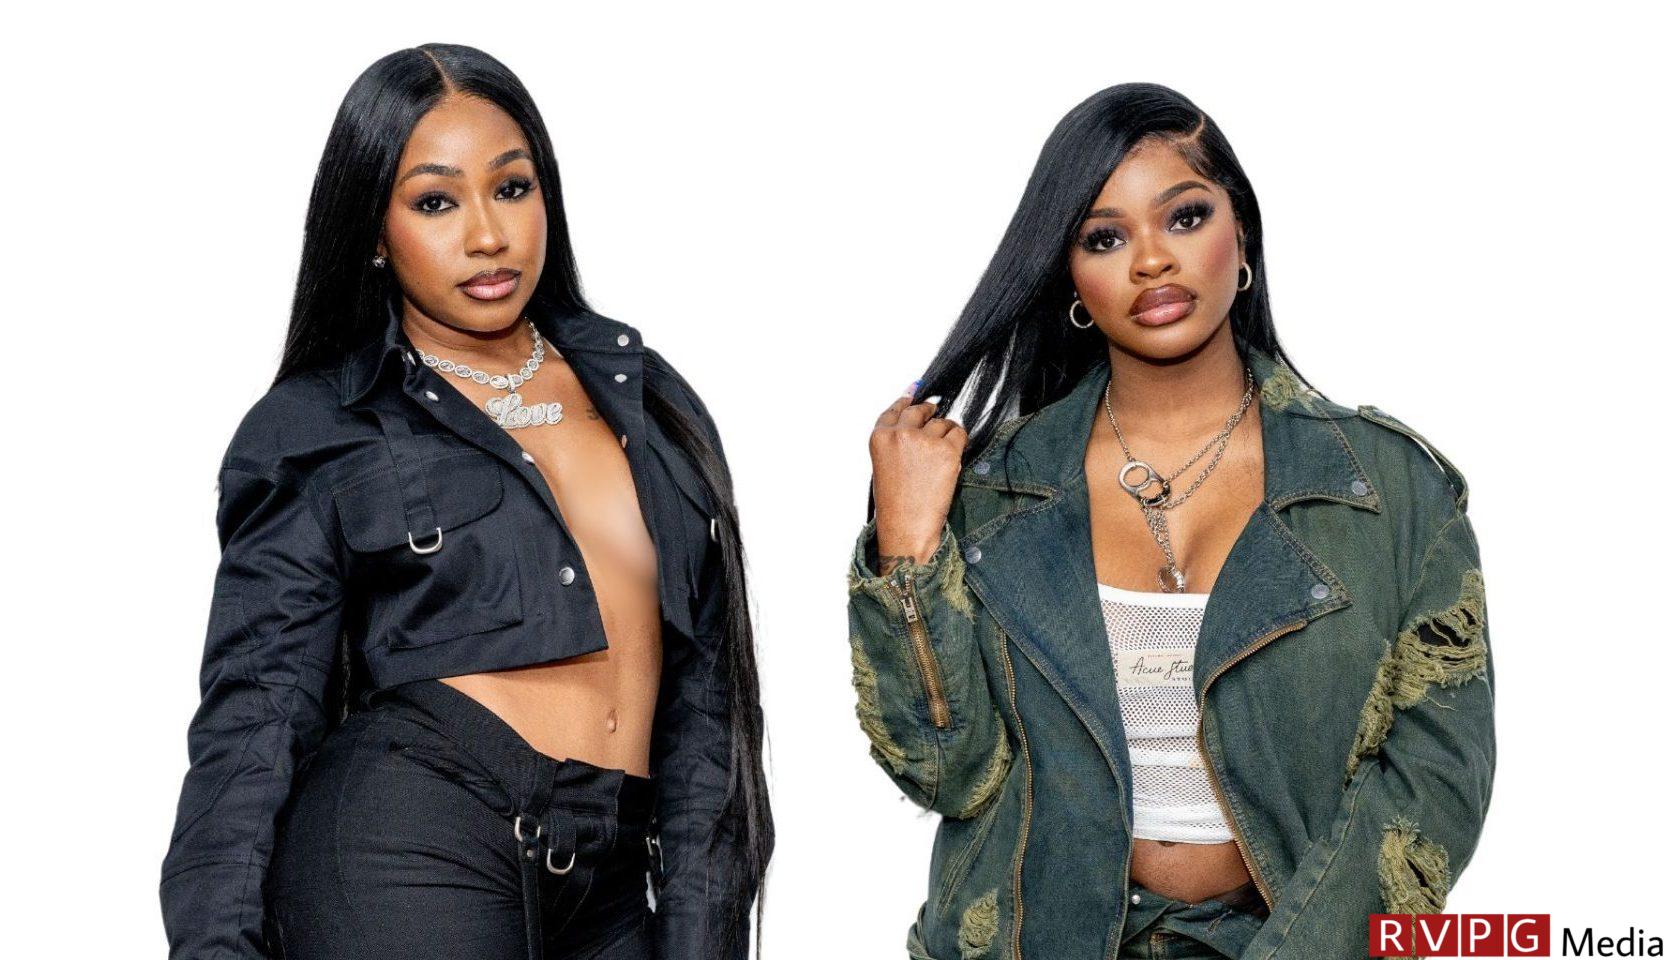 The era of the city girls over?  Social media is reacting as Yung Miami and JT continue to promote their solo music